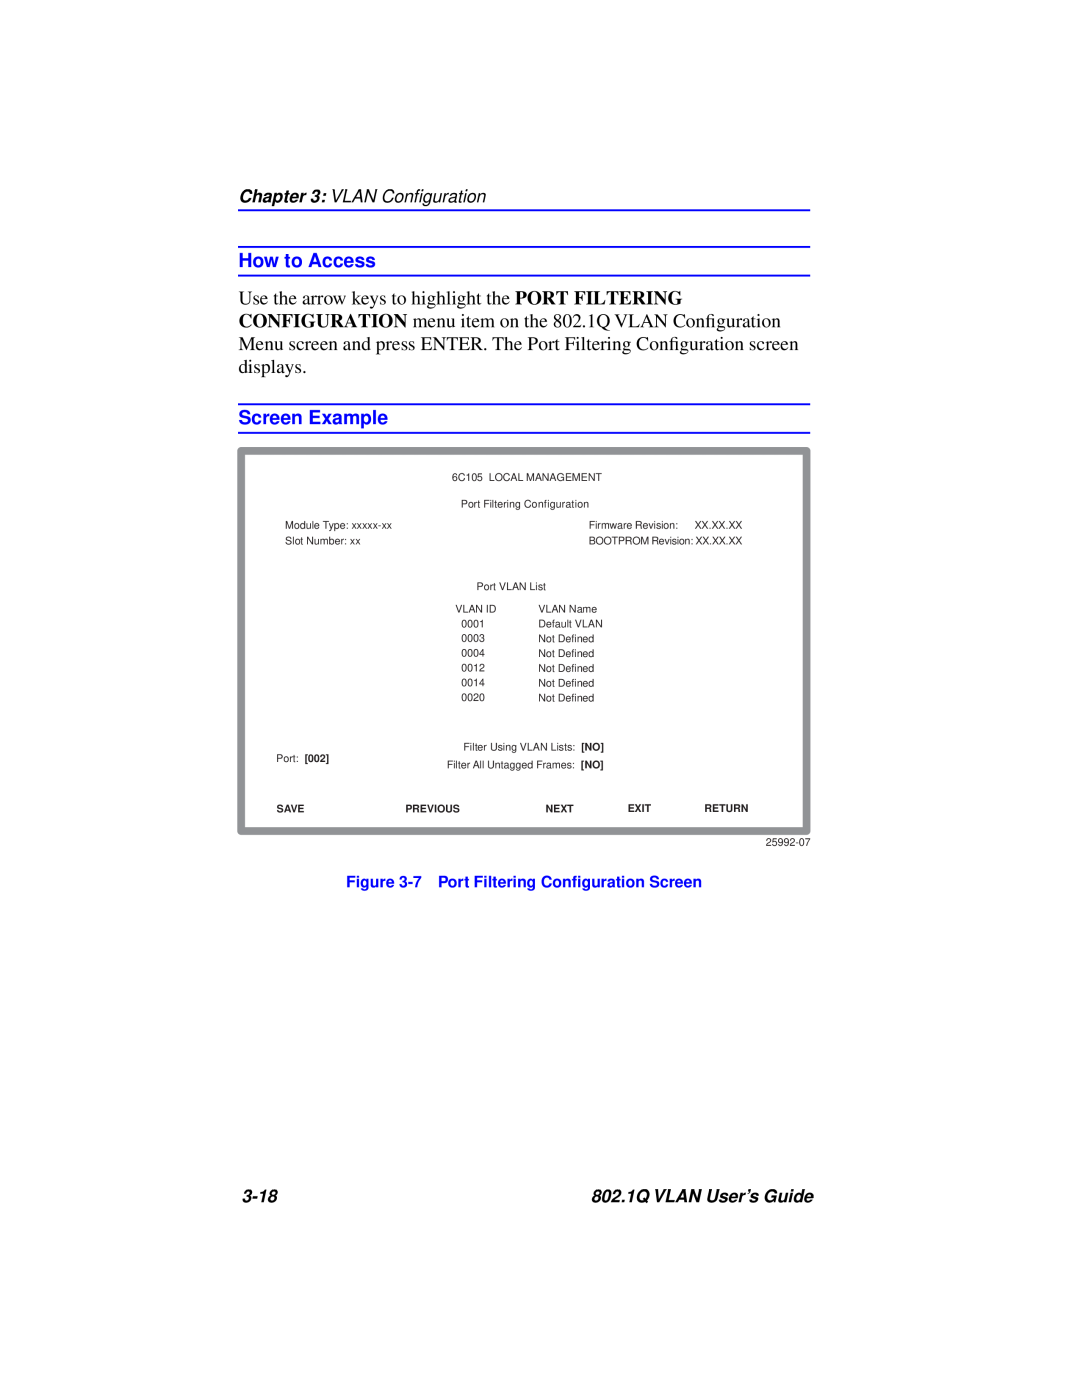 Cabletron Systems manual How to Access, Screen Example, VLAN Conﬁguration, 3-18, 802.1Q VLAN User’s Guide 